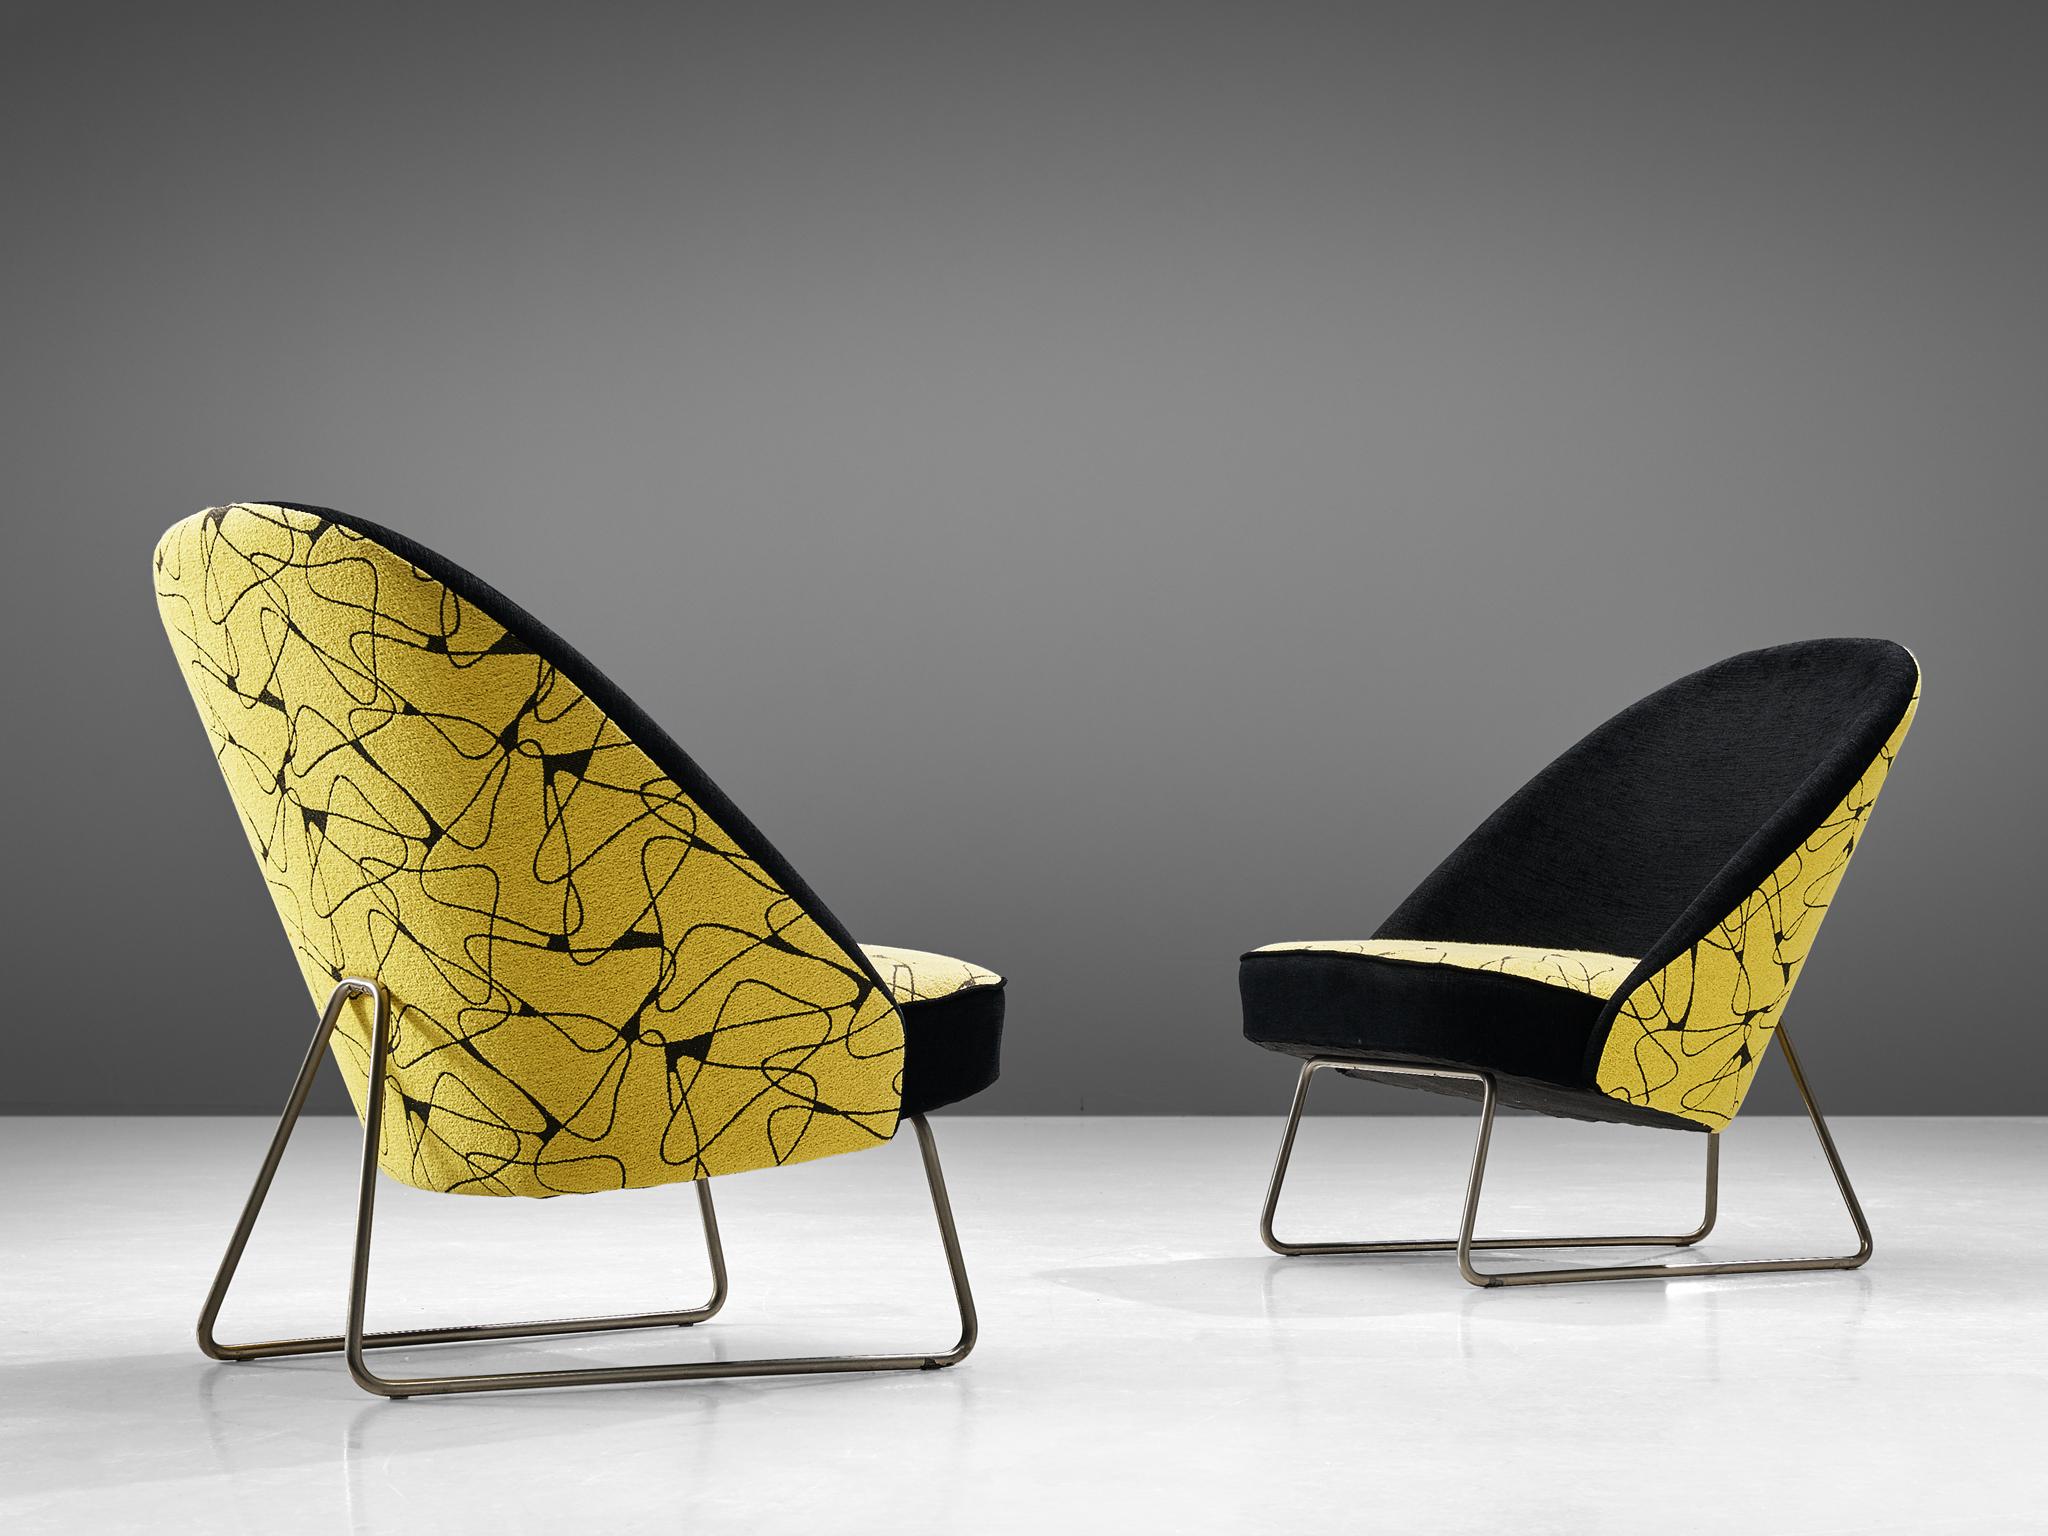 Theo Ruth for Artifort, pair of easy chairs model 115, metal and fabric, the Netherlands, 1958

A pair of easy chairs with a metal base, designed by Theo Ruth for the company Artifort. The chairs are upholstere with a midecentury graphic woven